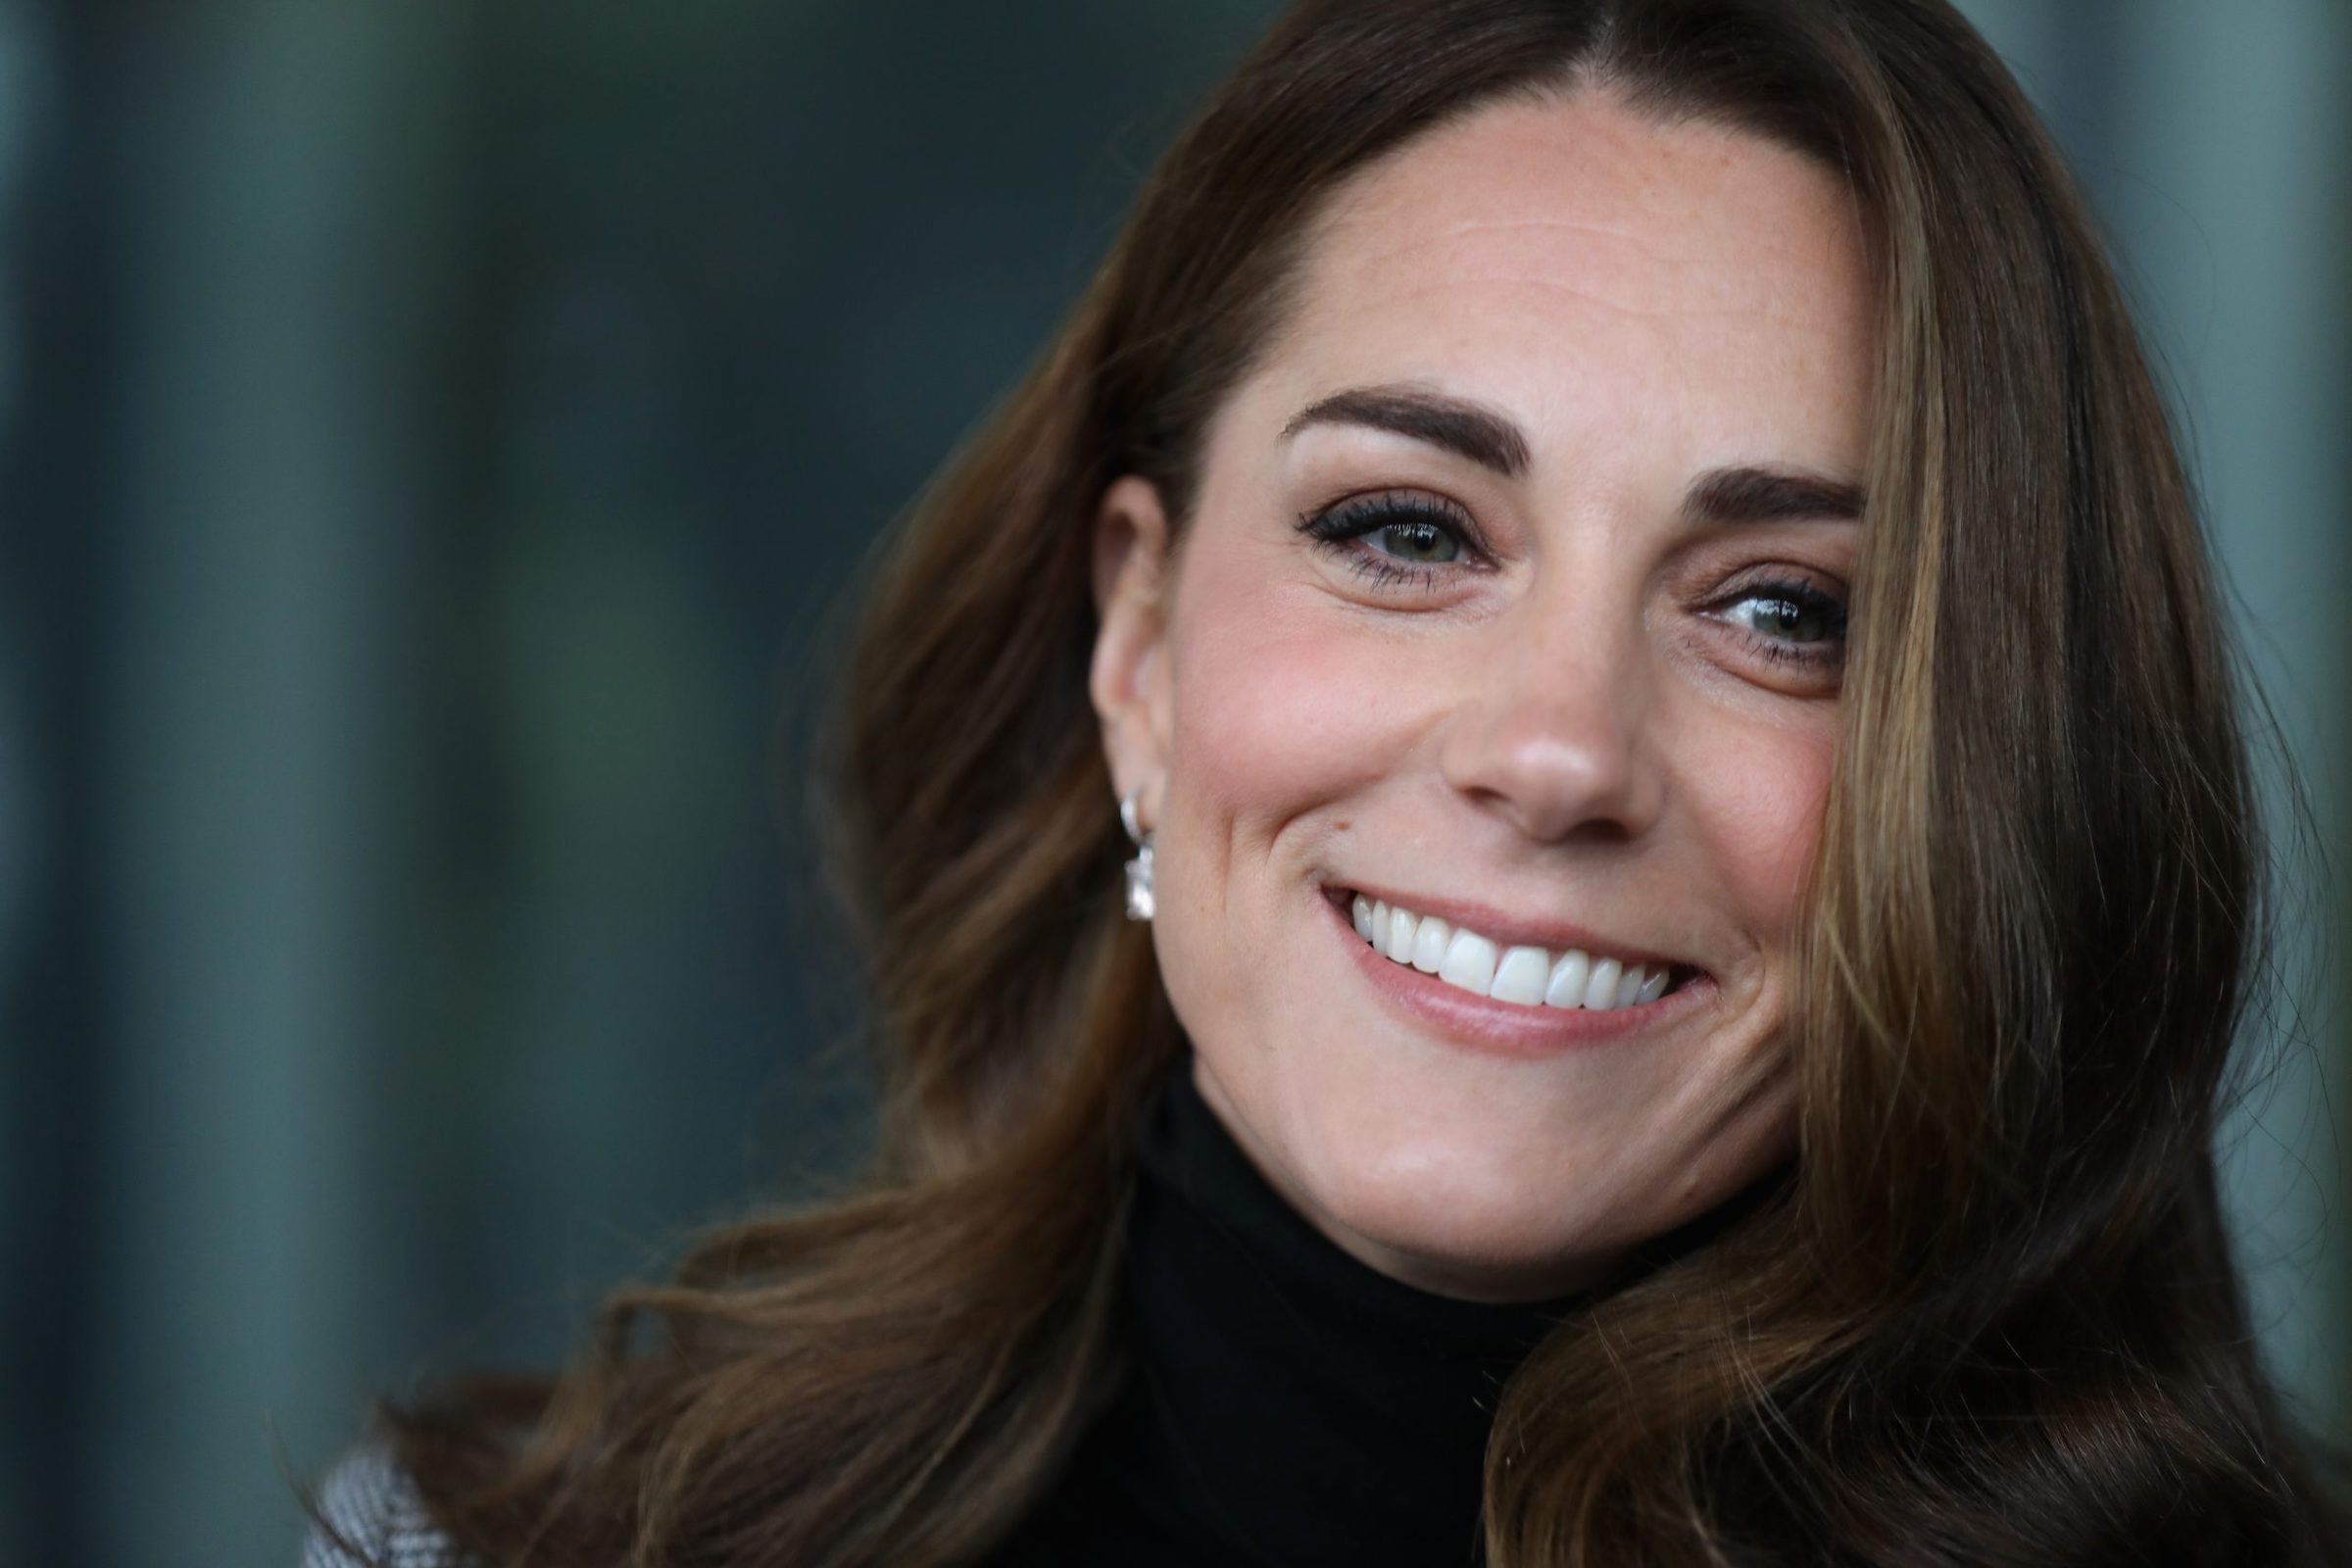 Venture into the elusive labyrinth of Duchess Kate's health. Glean the tea on Kate Middleton's health through royal pregnancies, rumored scandals, and radiant resilience, amidst a wealth of Windsor wellness.